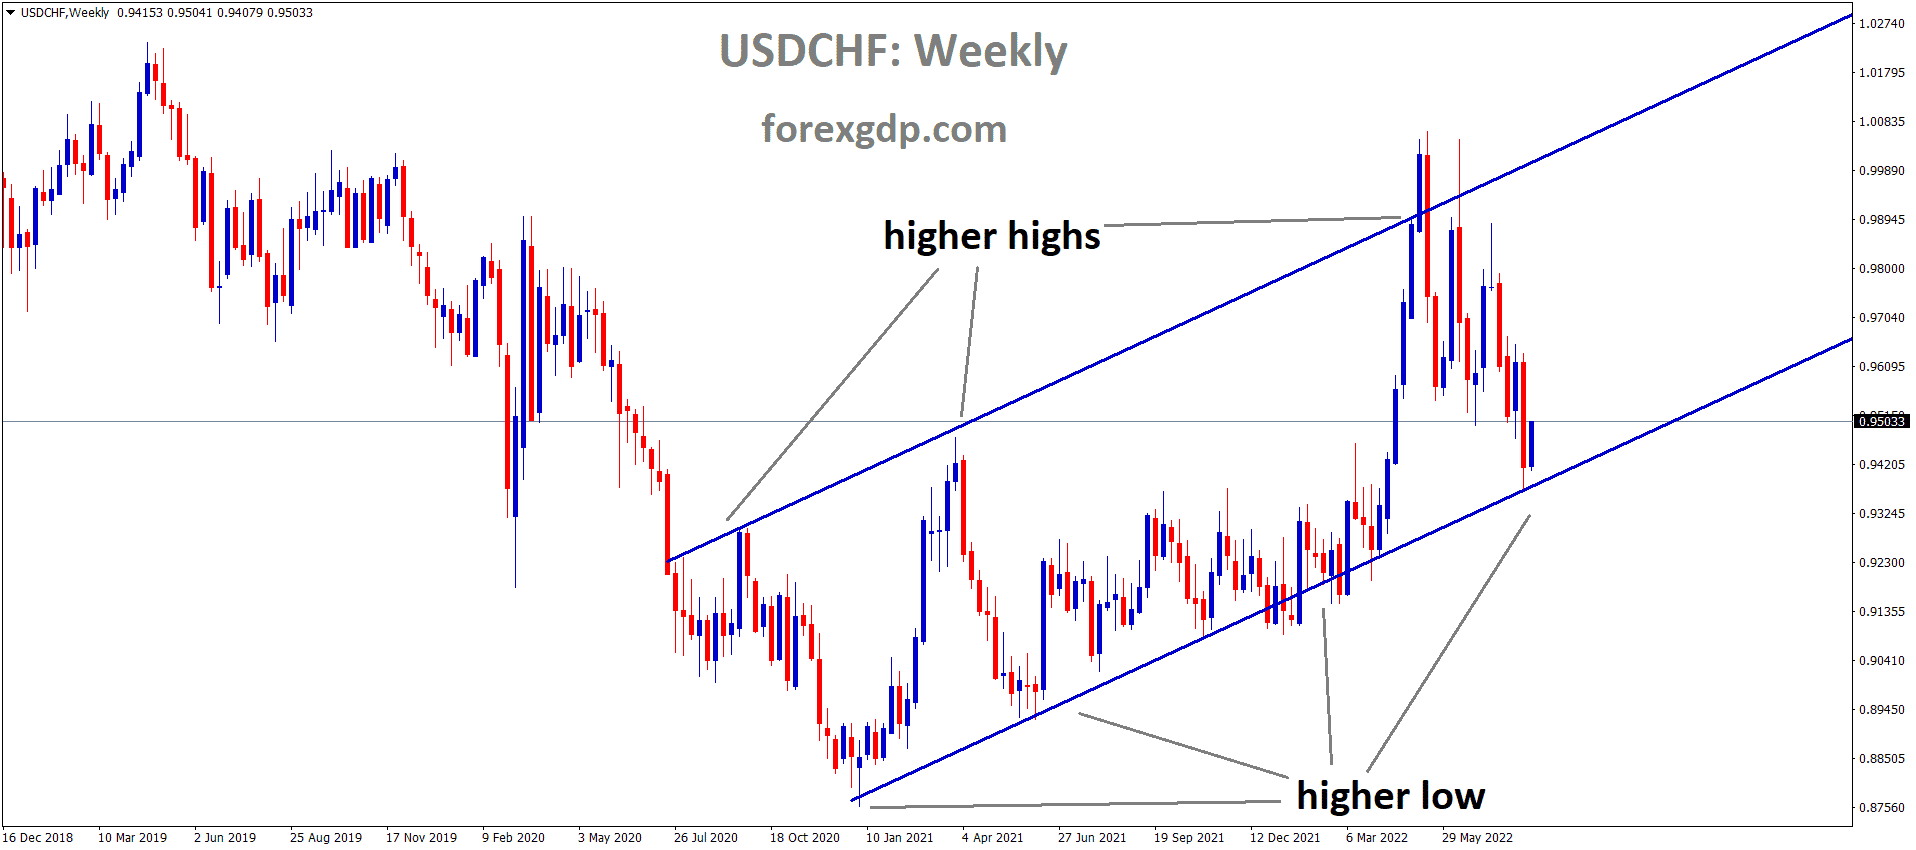 USDCHF is moving in an Ascending channel and the Market has rebounded from the higher low area of the channel